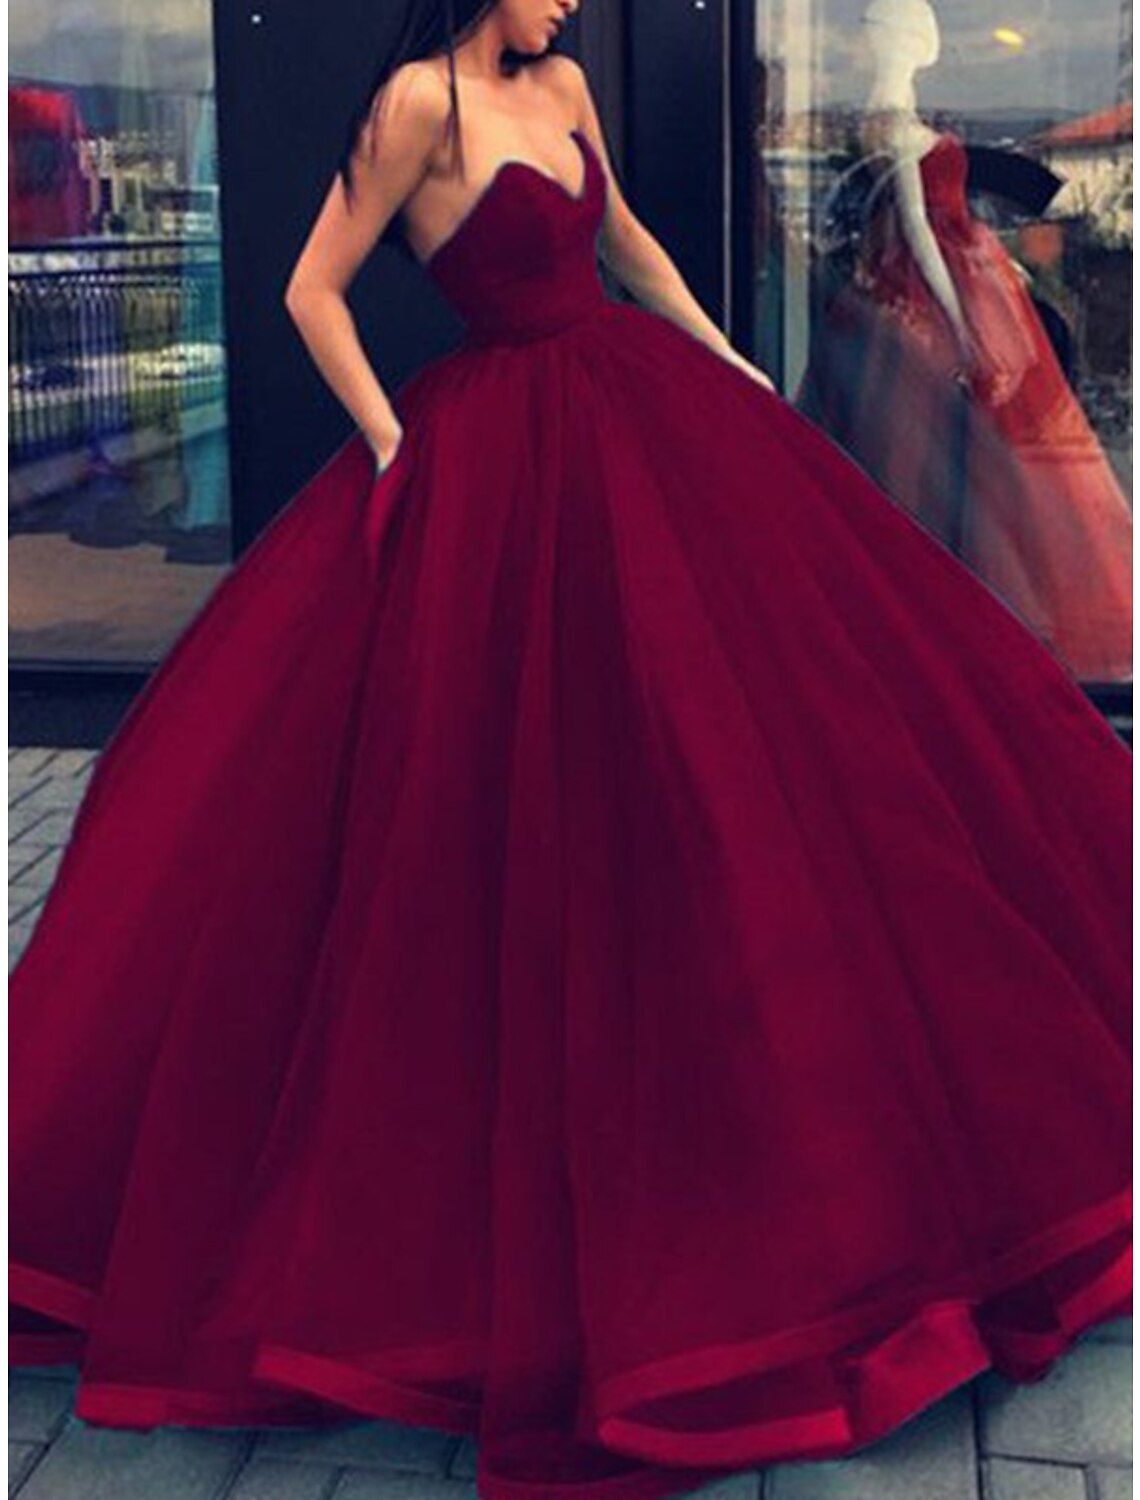 Ball Gown Party Dress Beautiful Back Elegant Quinceanera Formal Evening Dress Strapless Sleeveless Floor Length Tulle with Sleek Pleats Tier